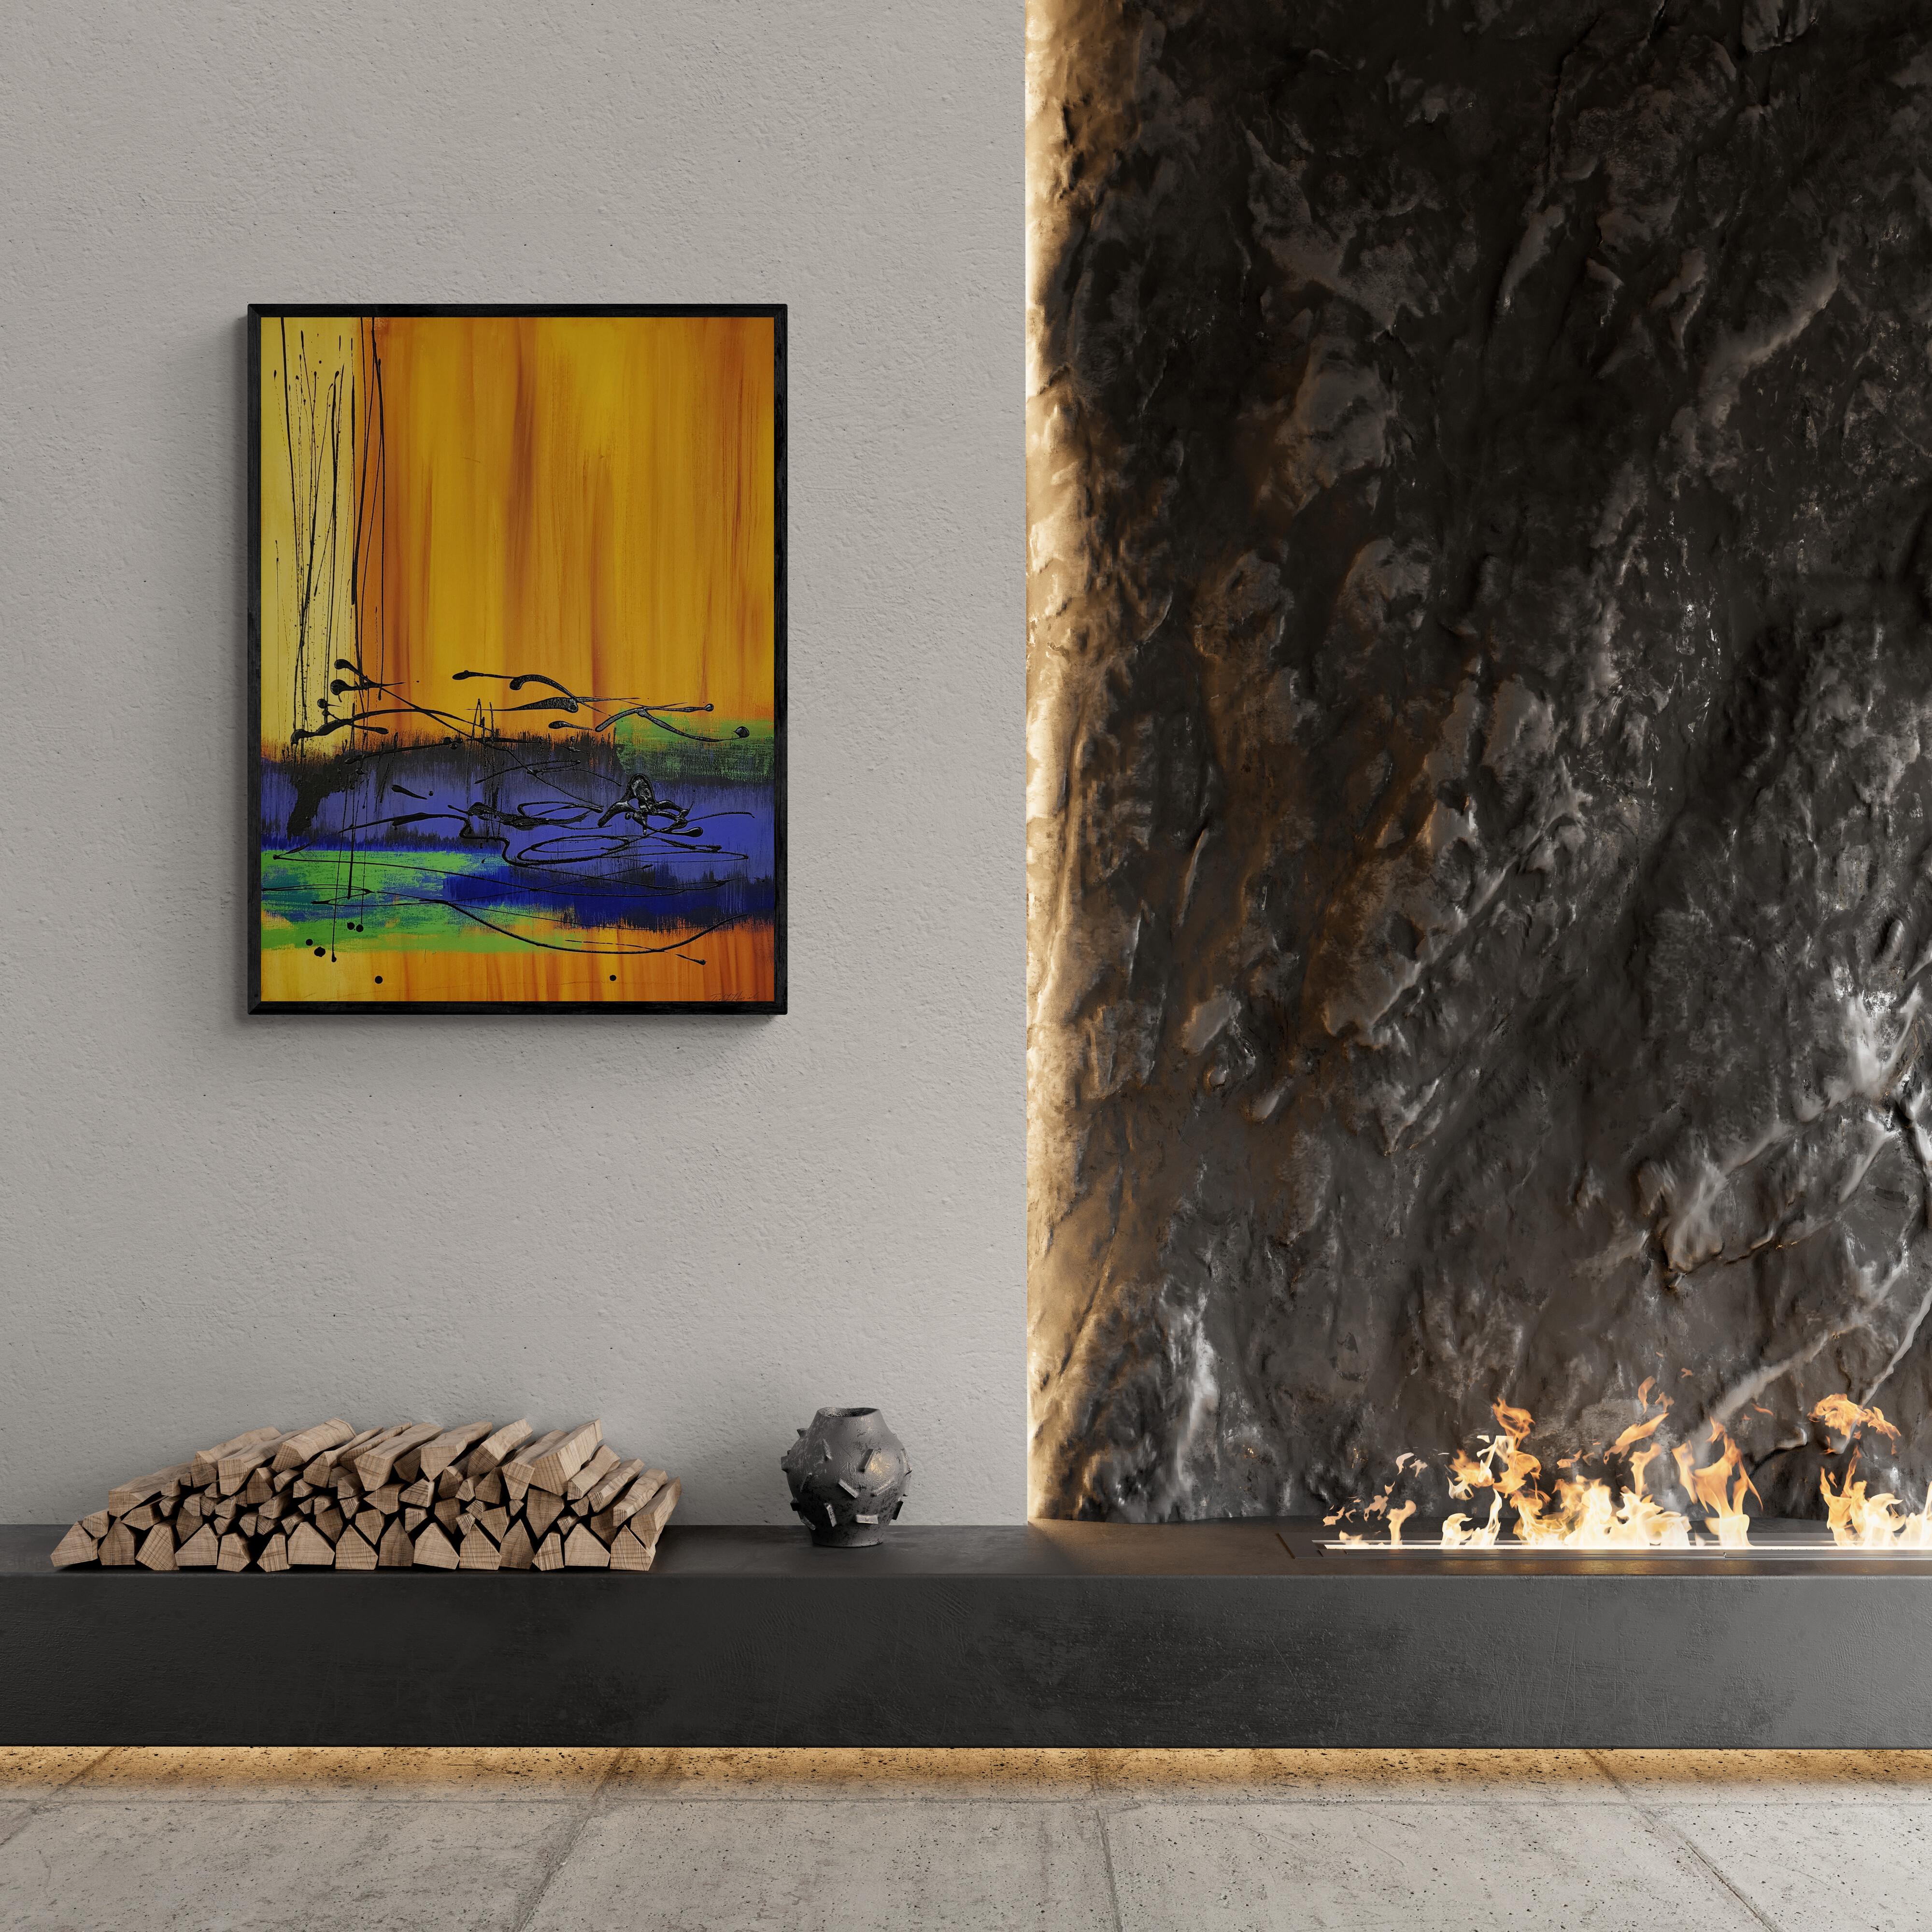 Ted Hinrichs
Spirit of Nature
Acrylic on Canvas
Year: 2023
Size: 40x30in
Framed: 41.5x31.5x2.5in
Signed by hand
COA provided
Ref.: 924802-1789
*Framed in black Wood

Tags: Abstract, Acrylic, Gestural Abstraction, Drips, Orange, Yellow, Blue, Green,